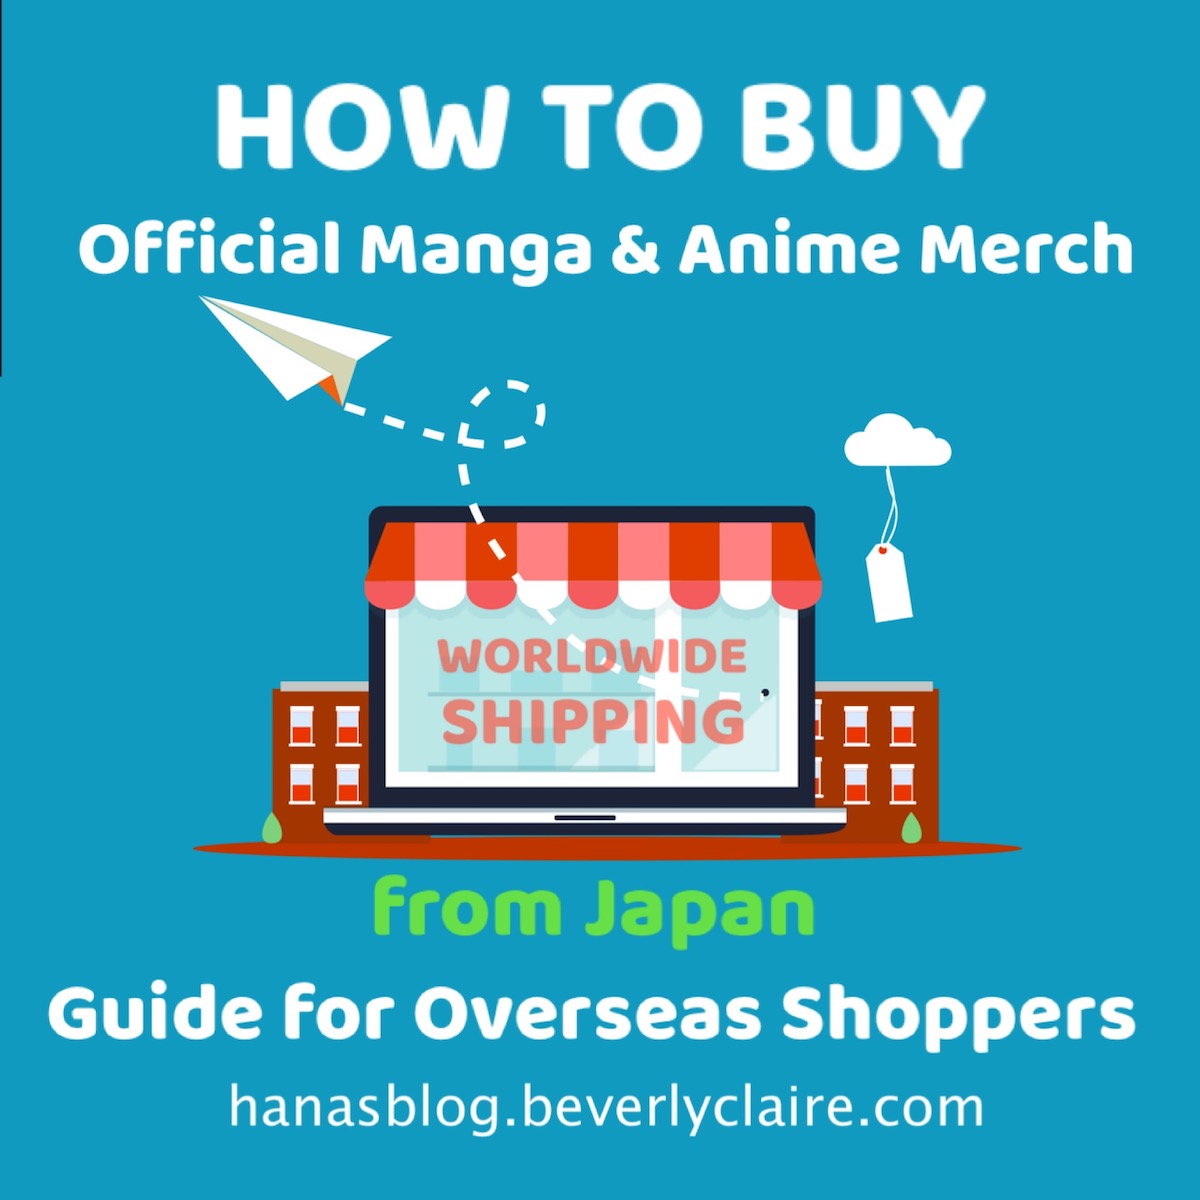 How to Buy Official Manga and Anime Merch from Japan - Guide for Overseas Shoppers